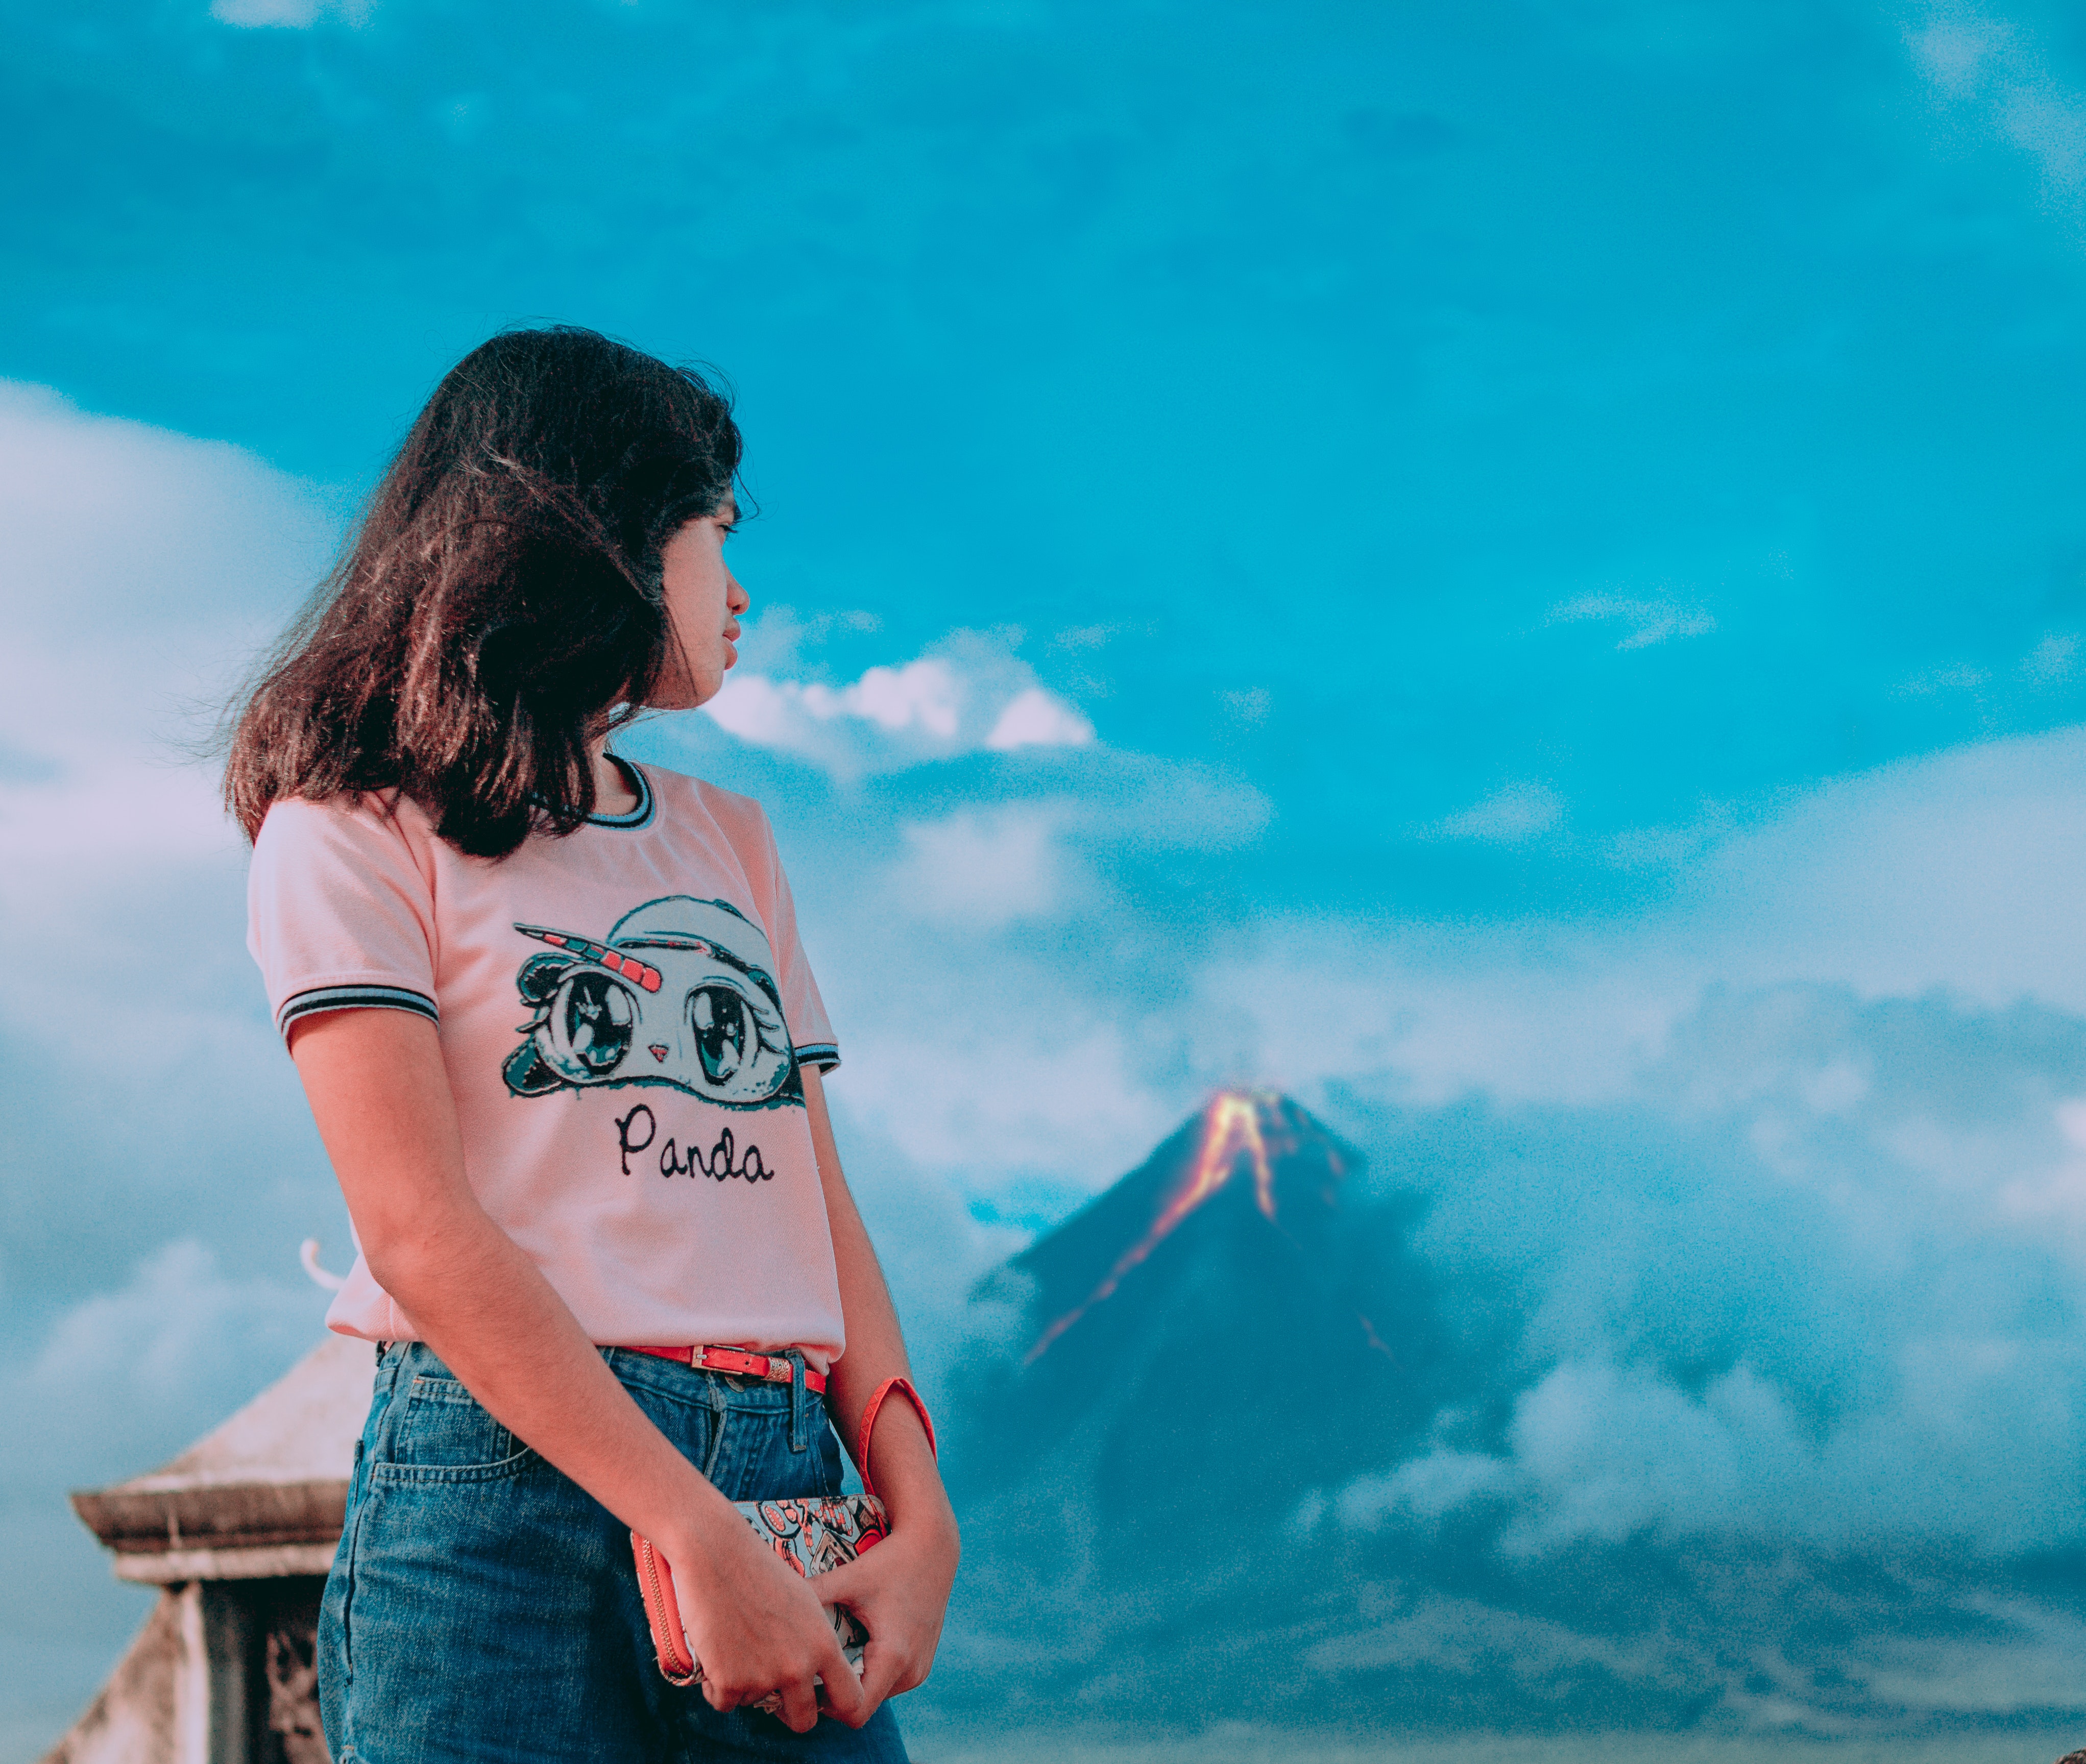 Photography of a Girl In Front of Erupting Volcano, Calamity, Mayon Volcano, Wear, Volcano, HQ Photo